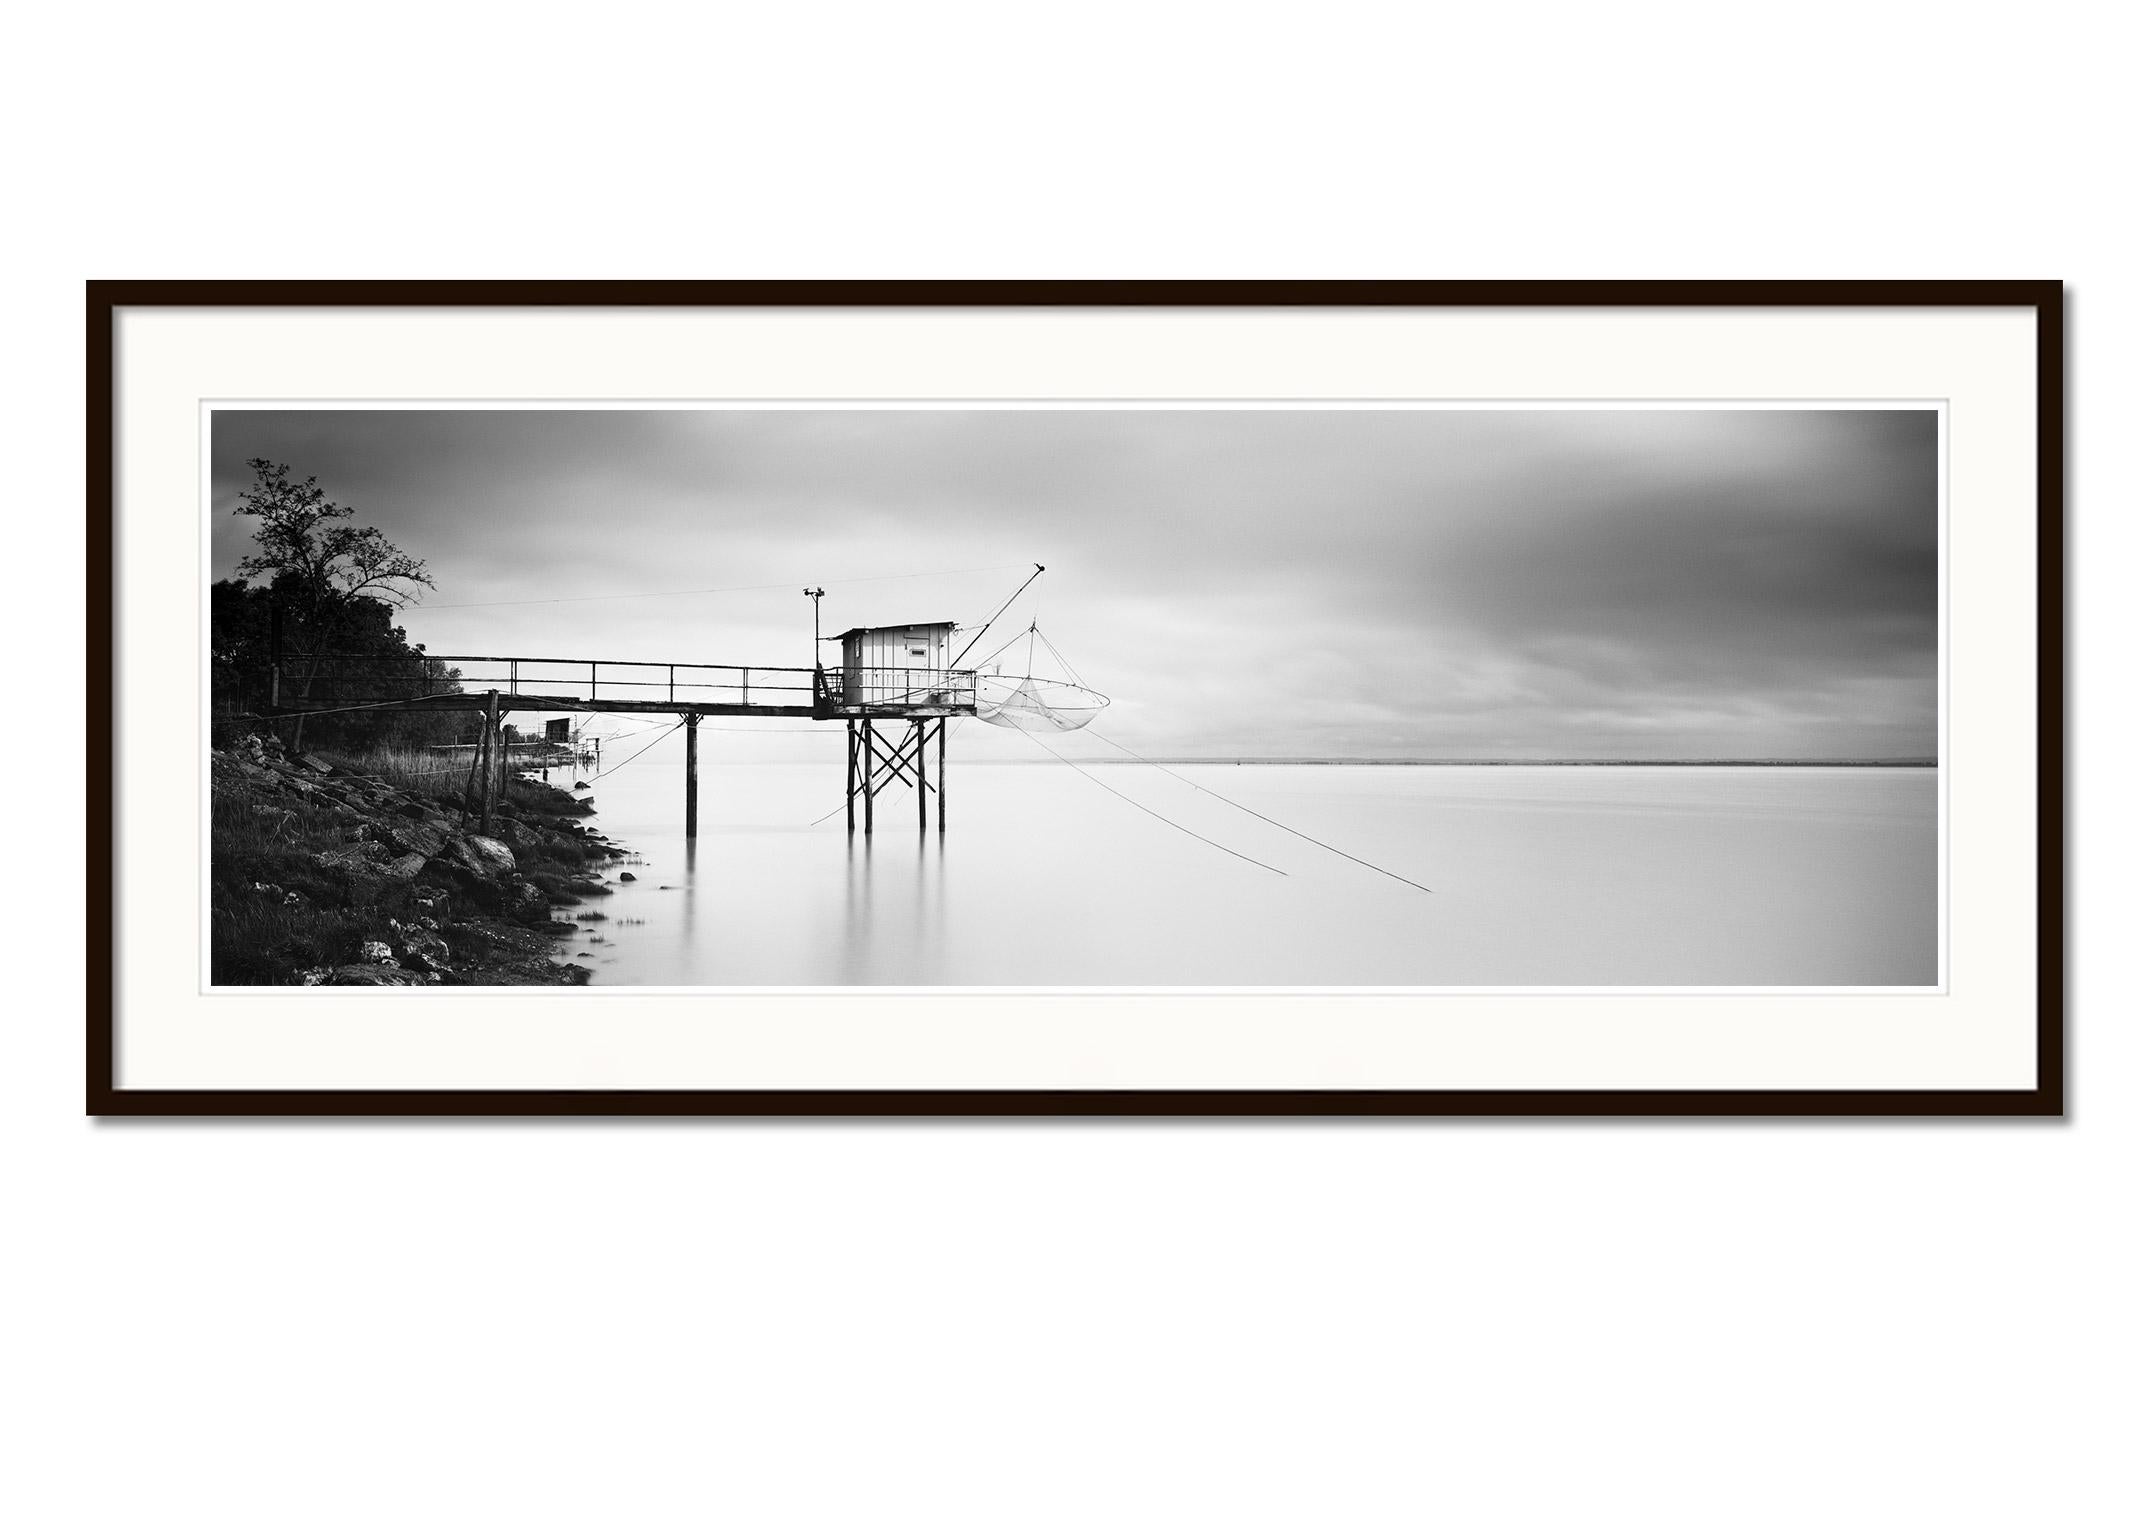 Stilt House Panorama, Fishing, Storm, black white fineart landscape photography - Gray Black and White Photograph by Gerald Berghammer